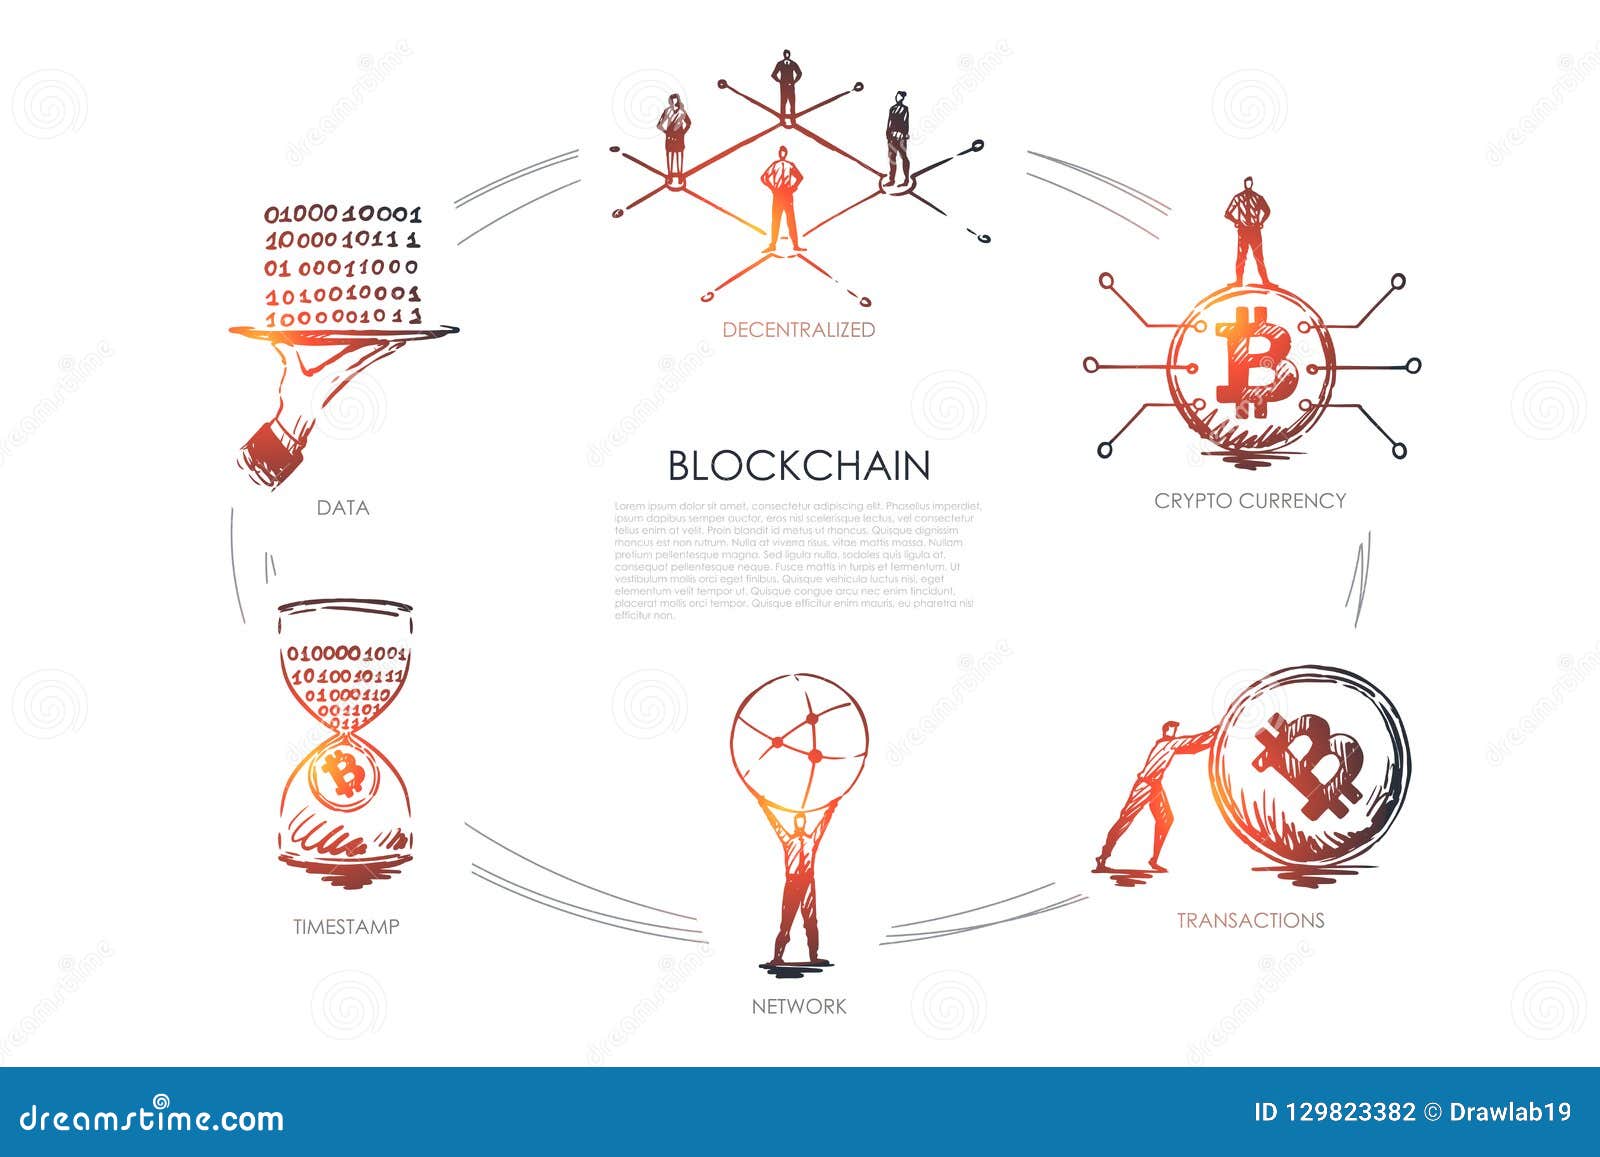 Blockchain, Decentralized, Crypto Currency, Transactions ...